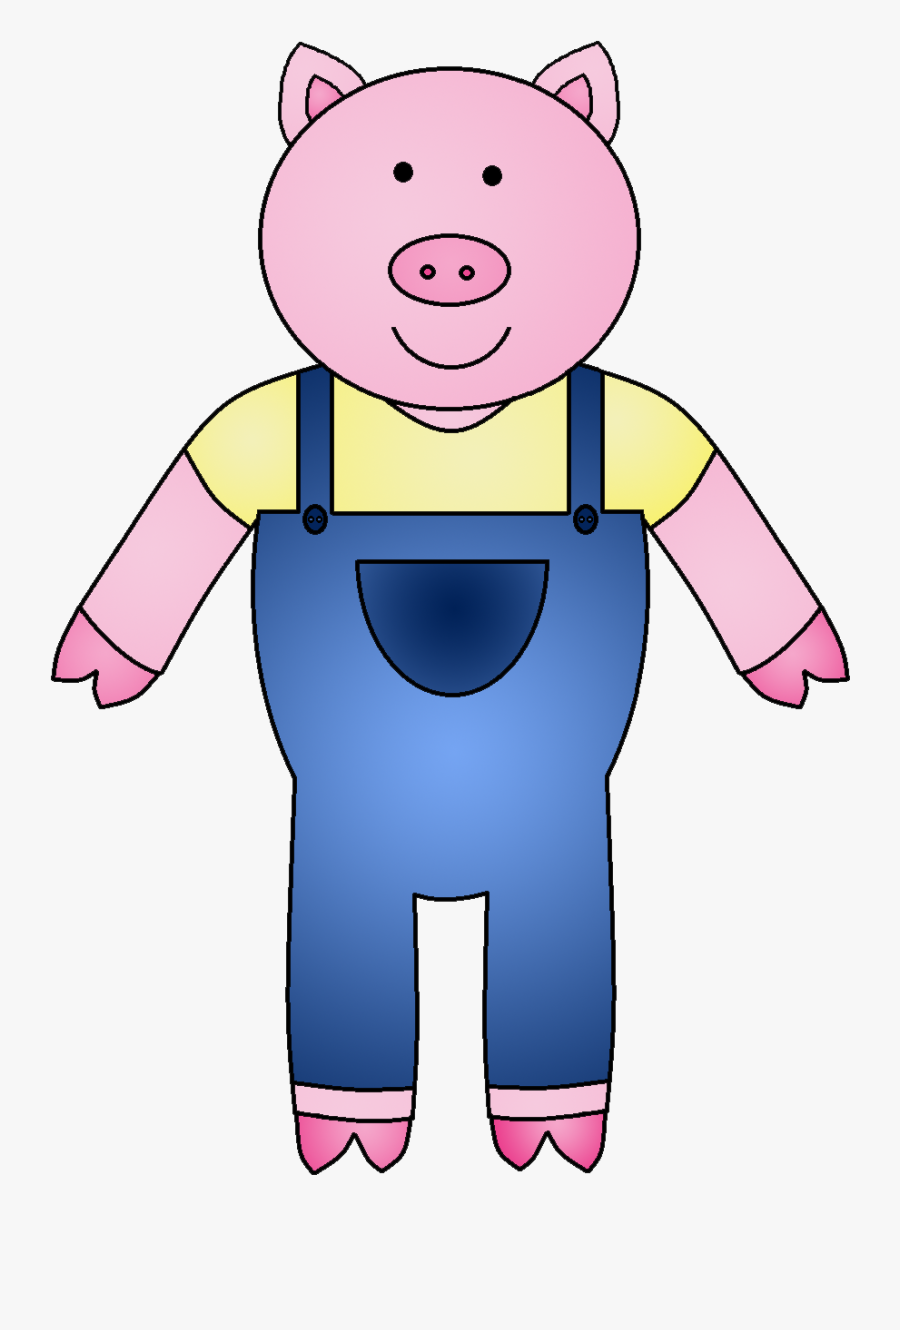 Cute Graphics For The 3 Little Pigs - Three Little Pigs Pig, Transparent Clipart